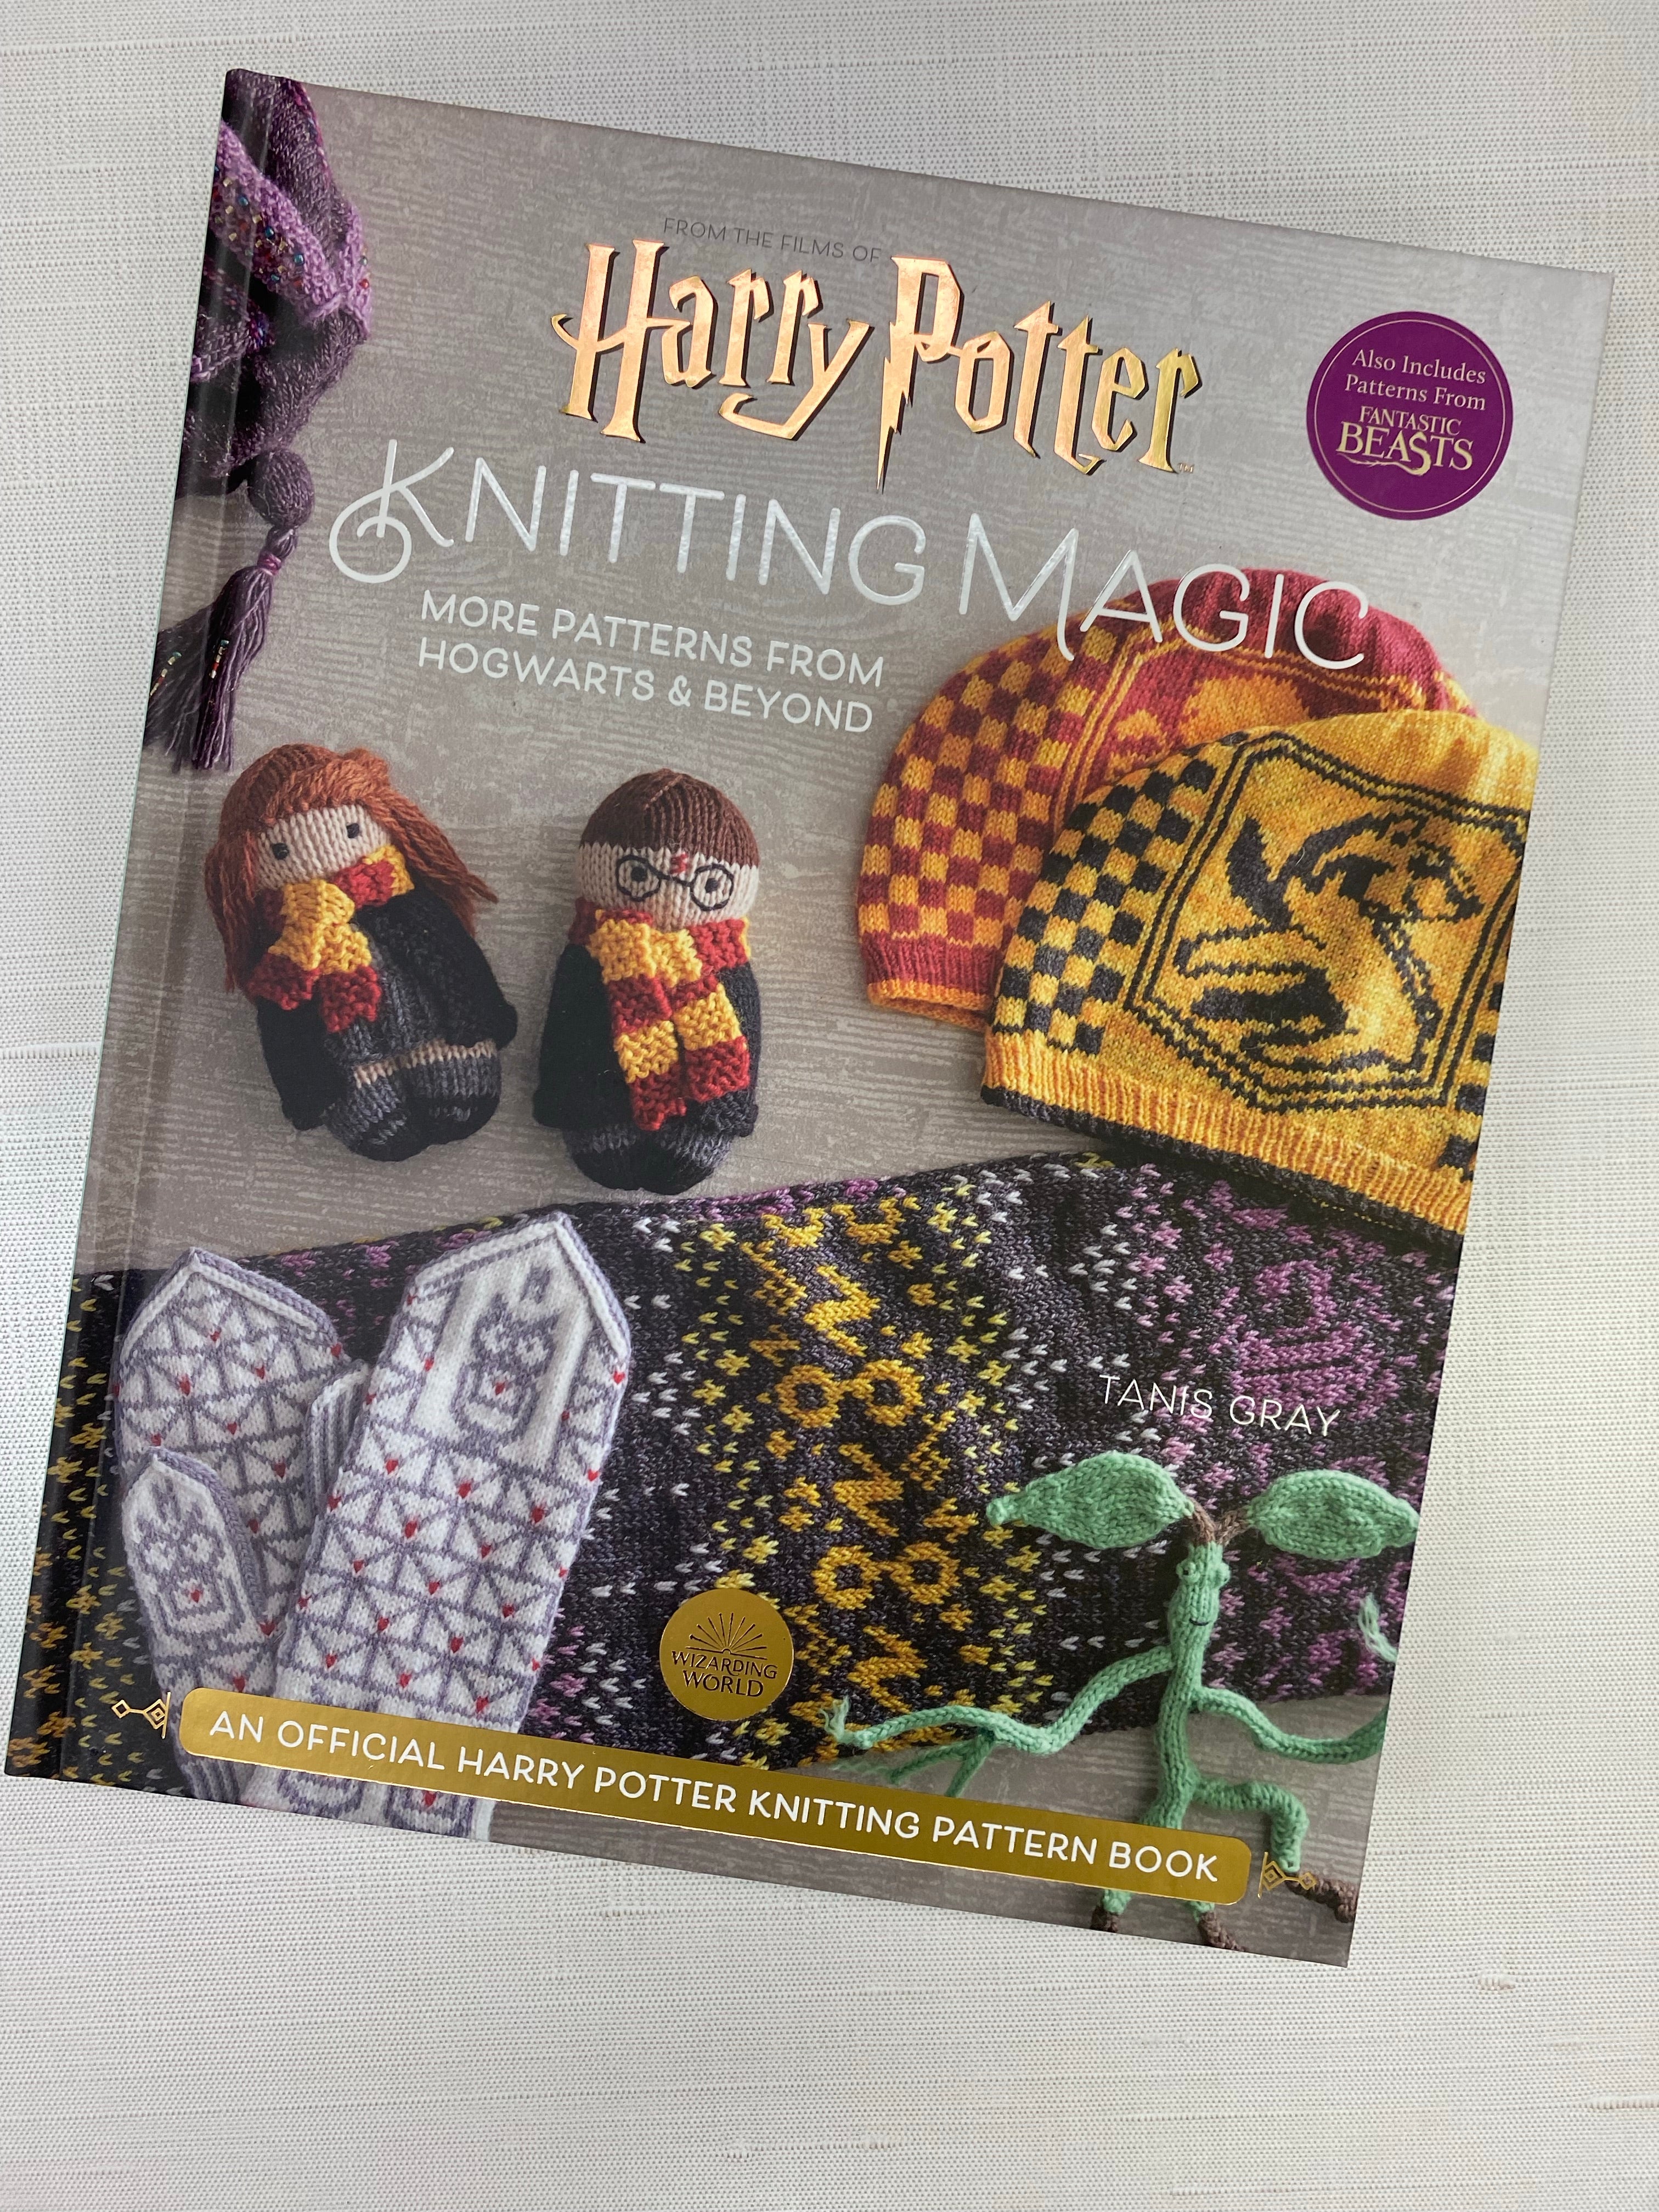 Knitting Magic: More Patterns from Hogwarts and Beyond